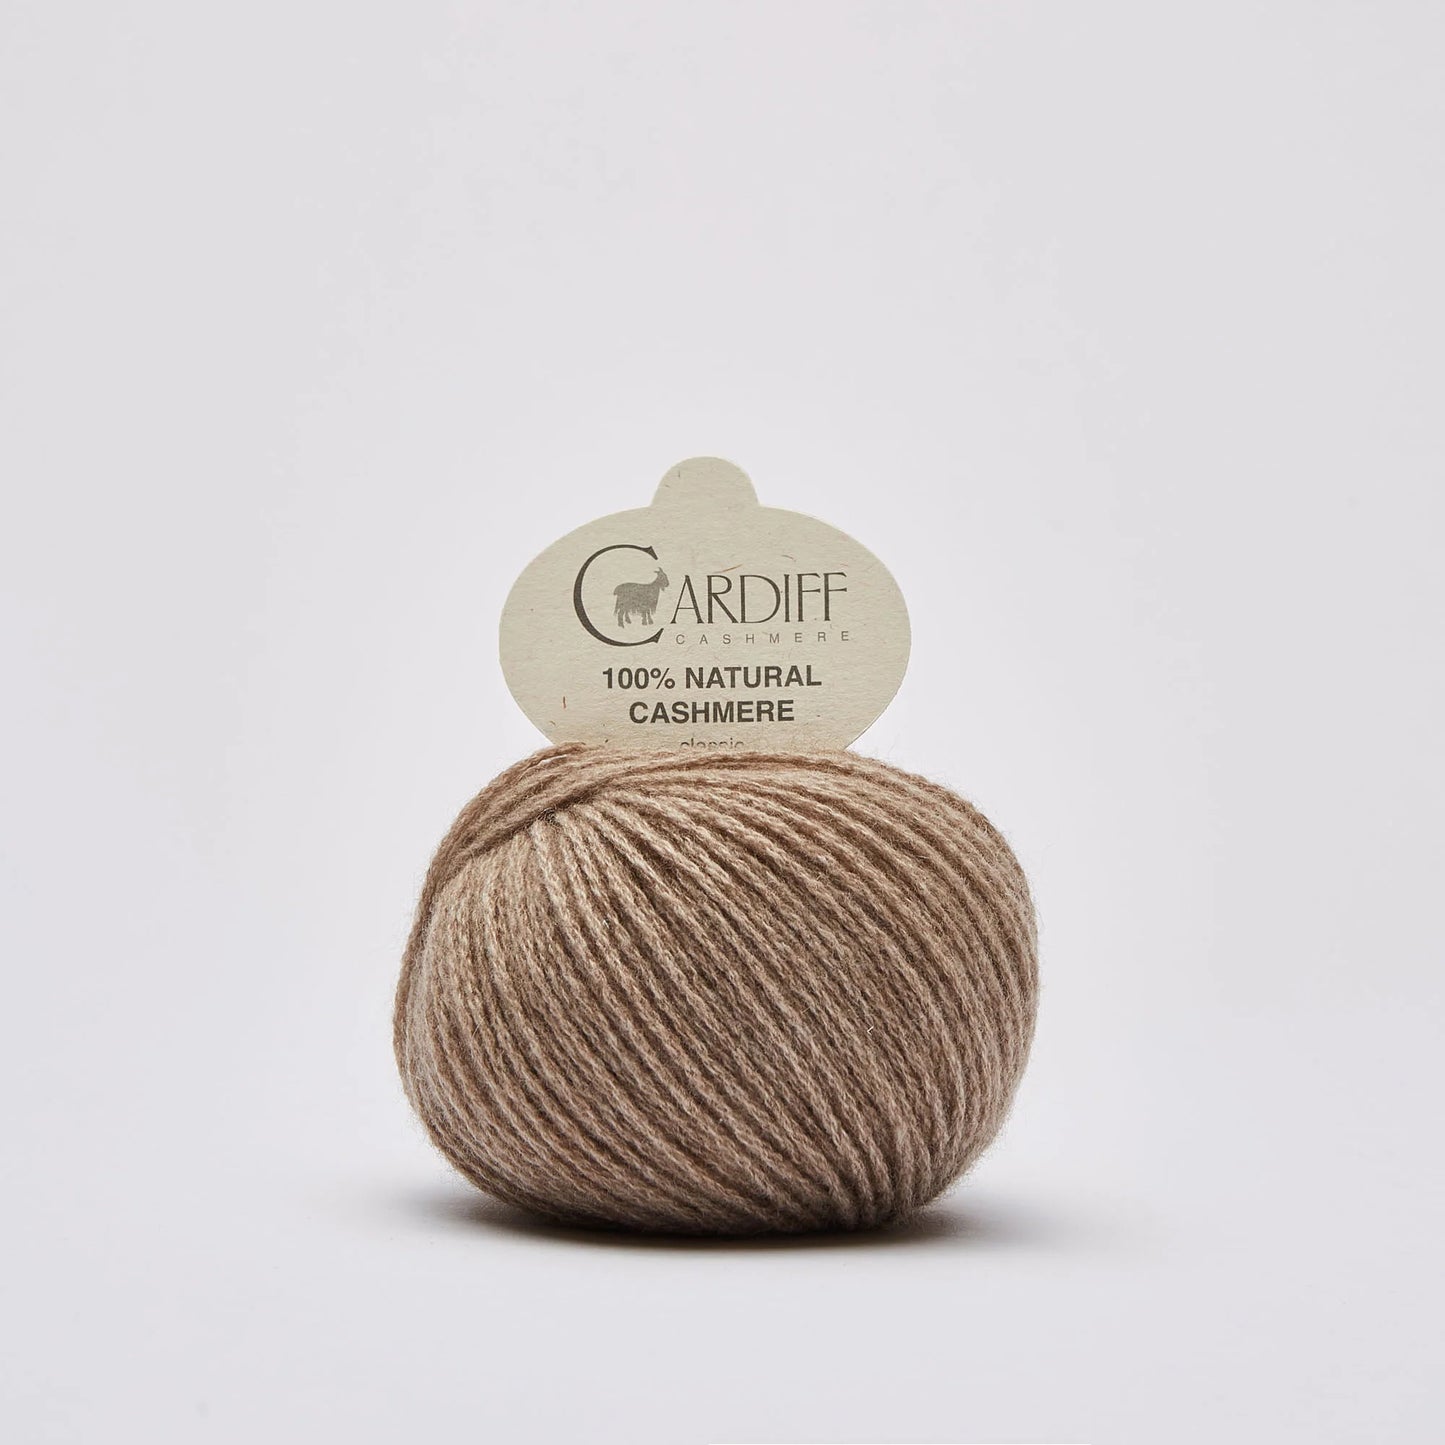 Cardiff Cashmere Classic 511 Brown UK